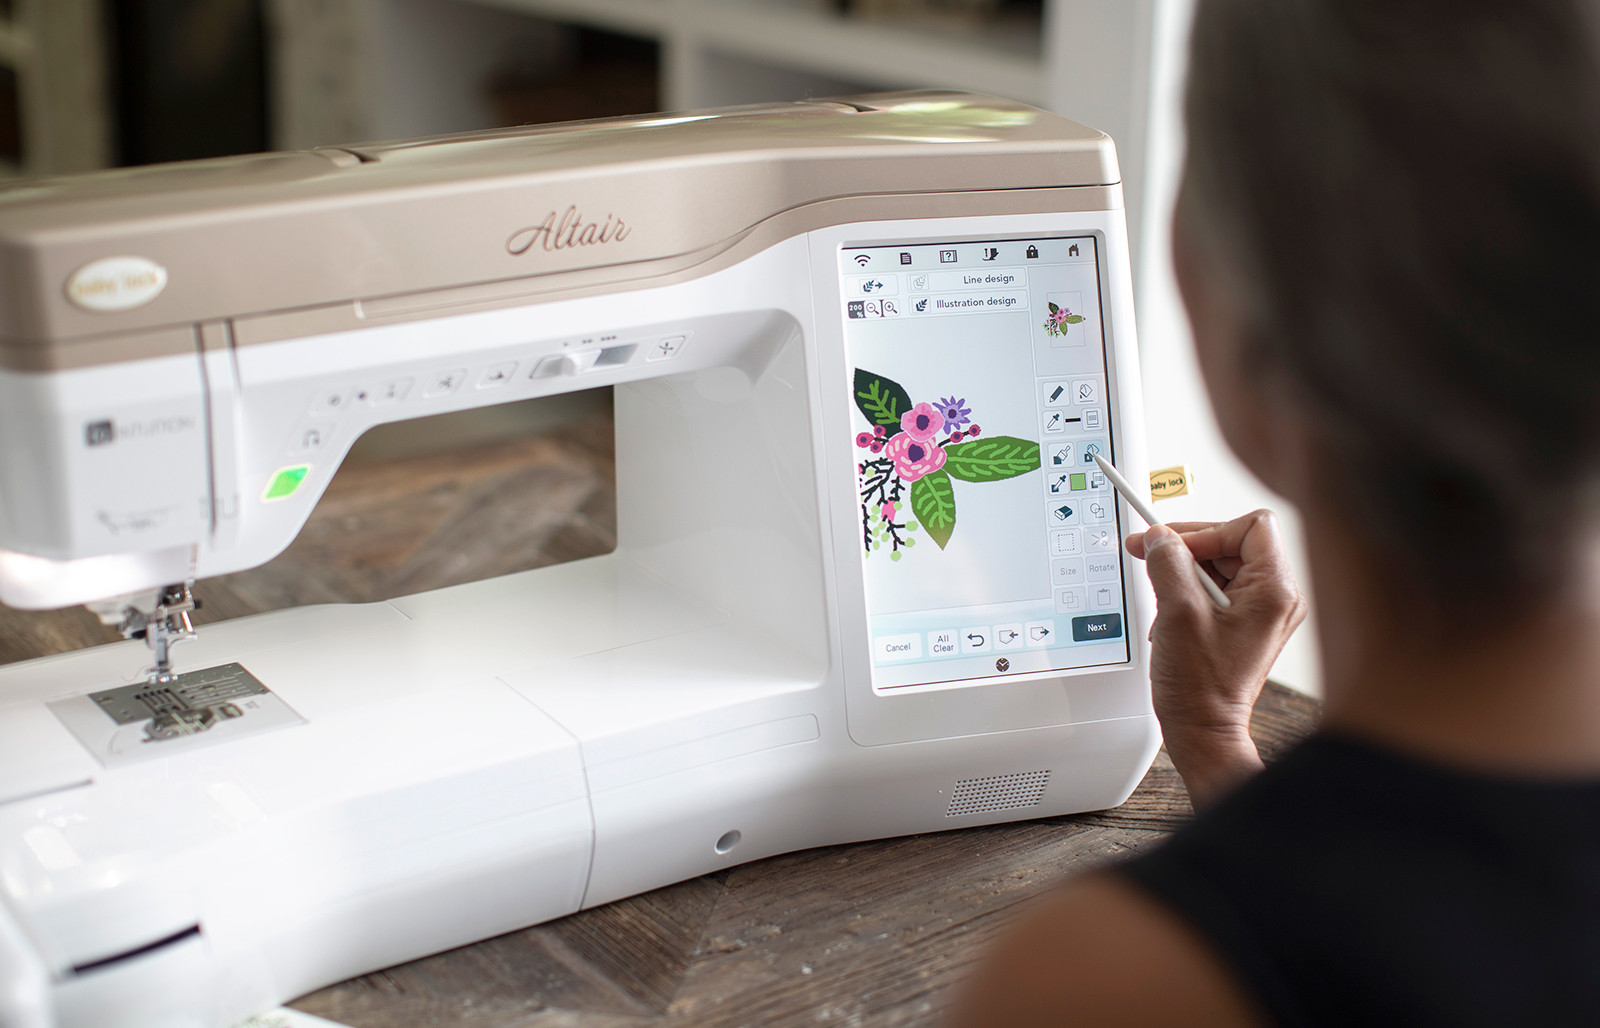 A person sitting at the Baby Lock Altair sewing and embroidery machine editing a design on the screen. 